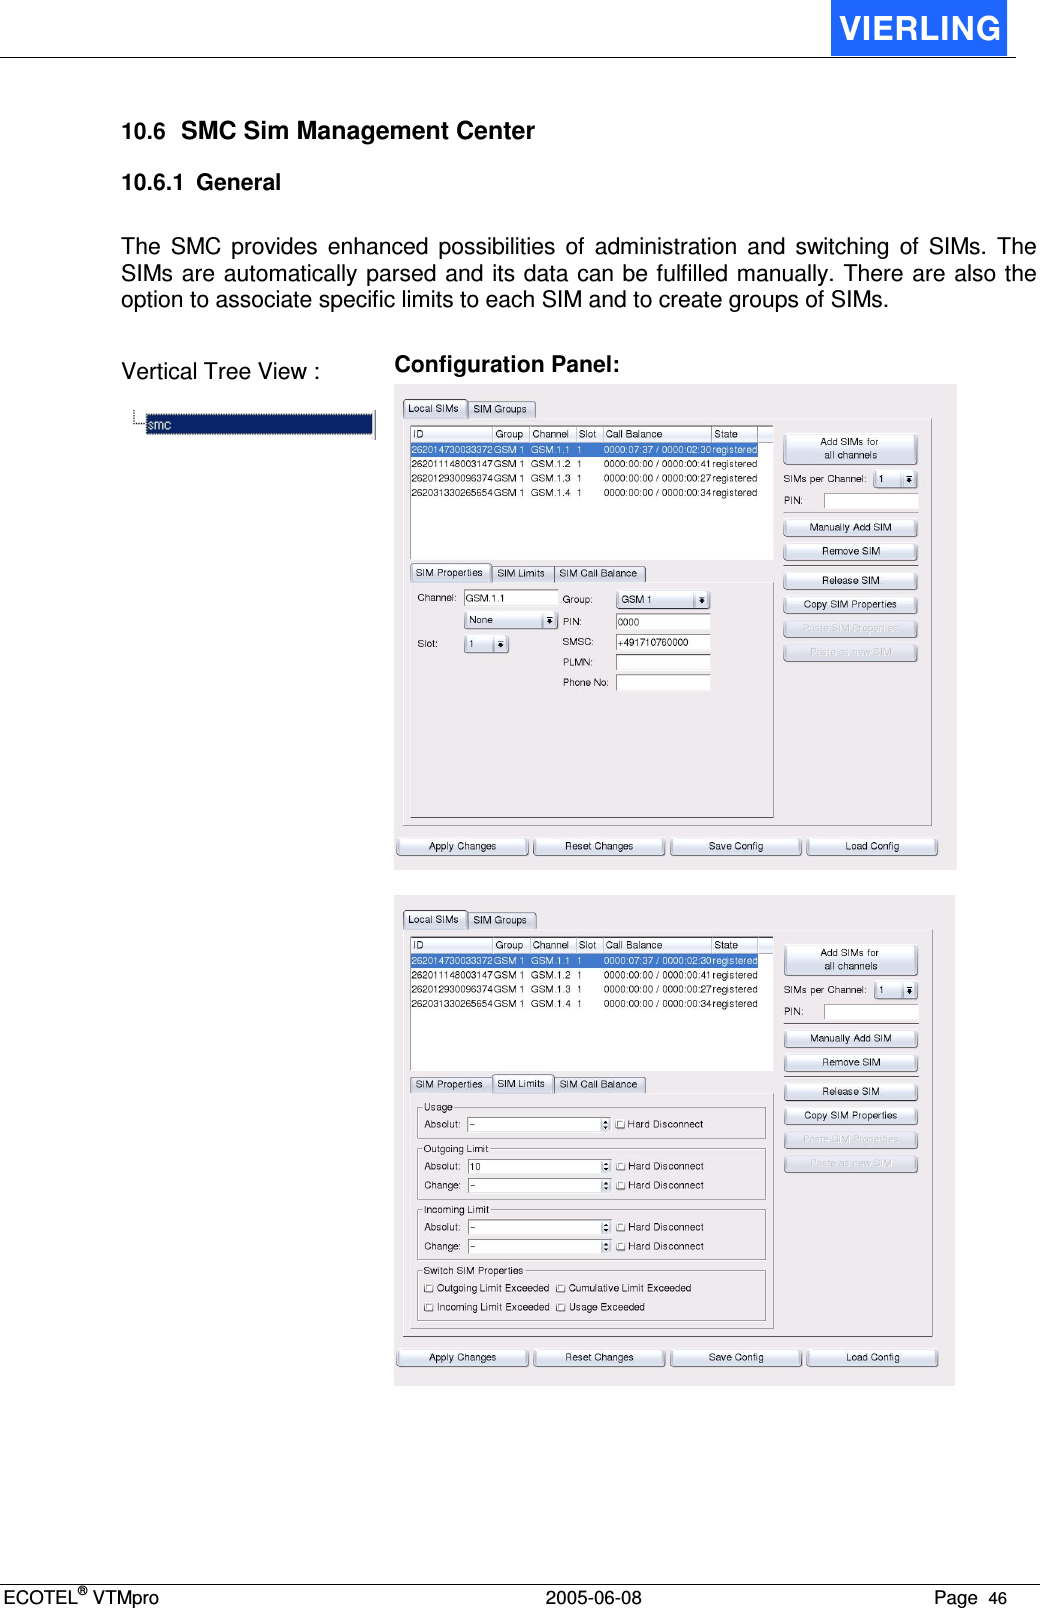 ECOTEL® VTMpro  2005-06-08 Page  46    10.6 SMC Sim Management Center 10.6.1  General The  SMC  provides  enhanced  possibilities  of  administration  and  switching  of  SIMs.  The SIMs are automatically parsed and its data can be fulfilled manually. There are also the option to associate specific limits to each SIM and to create groups of SIMs.  Vertical Tree View :  Configuration Panel:       